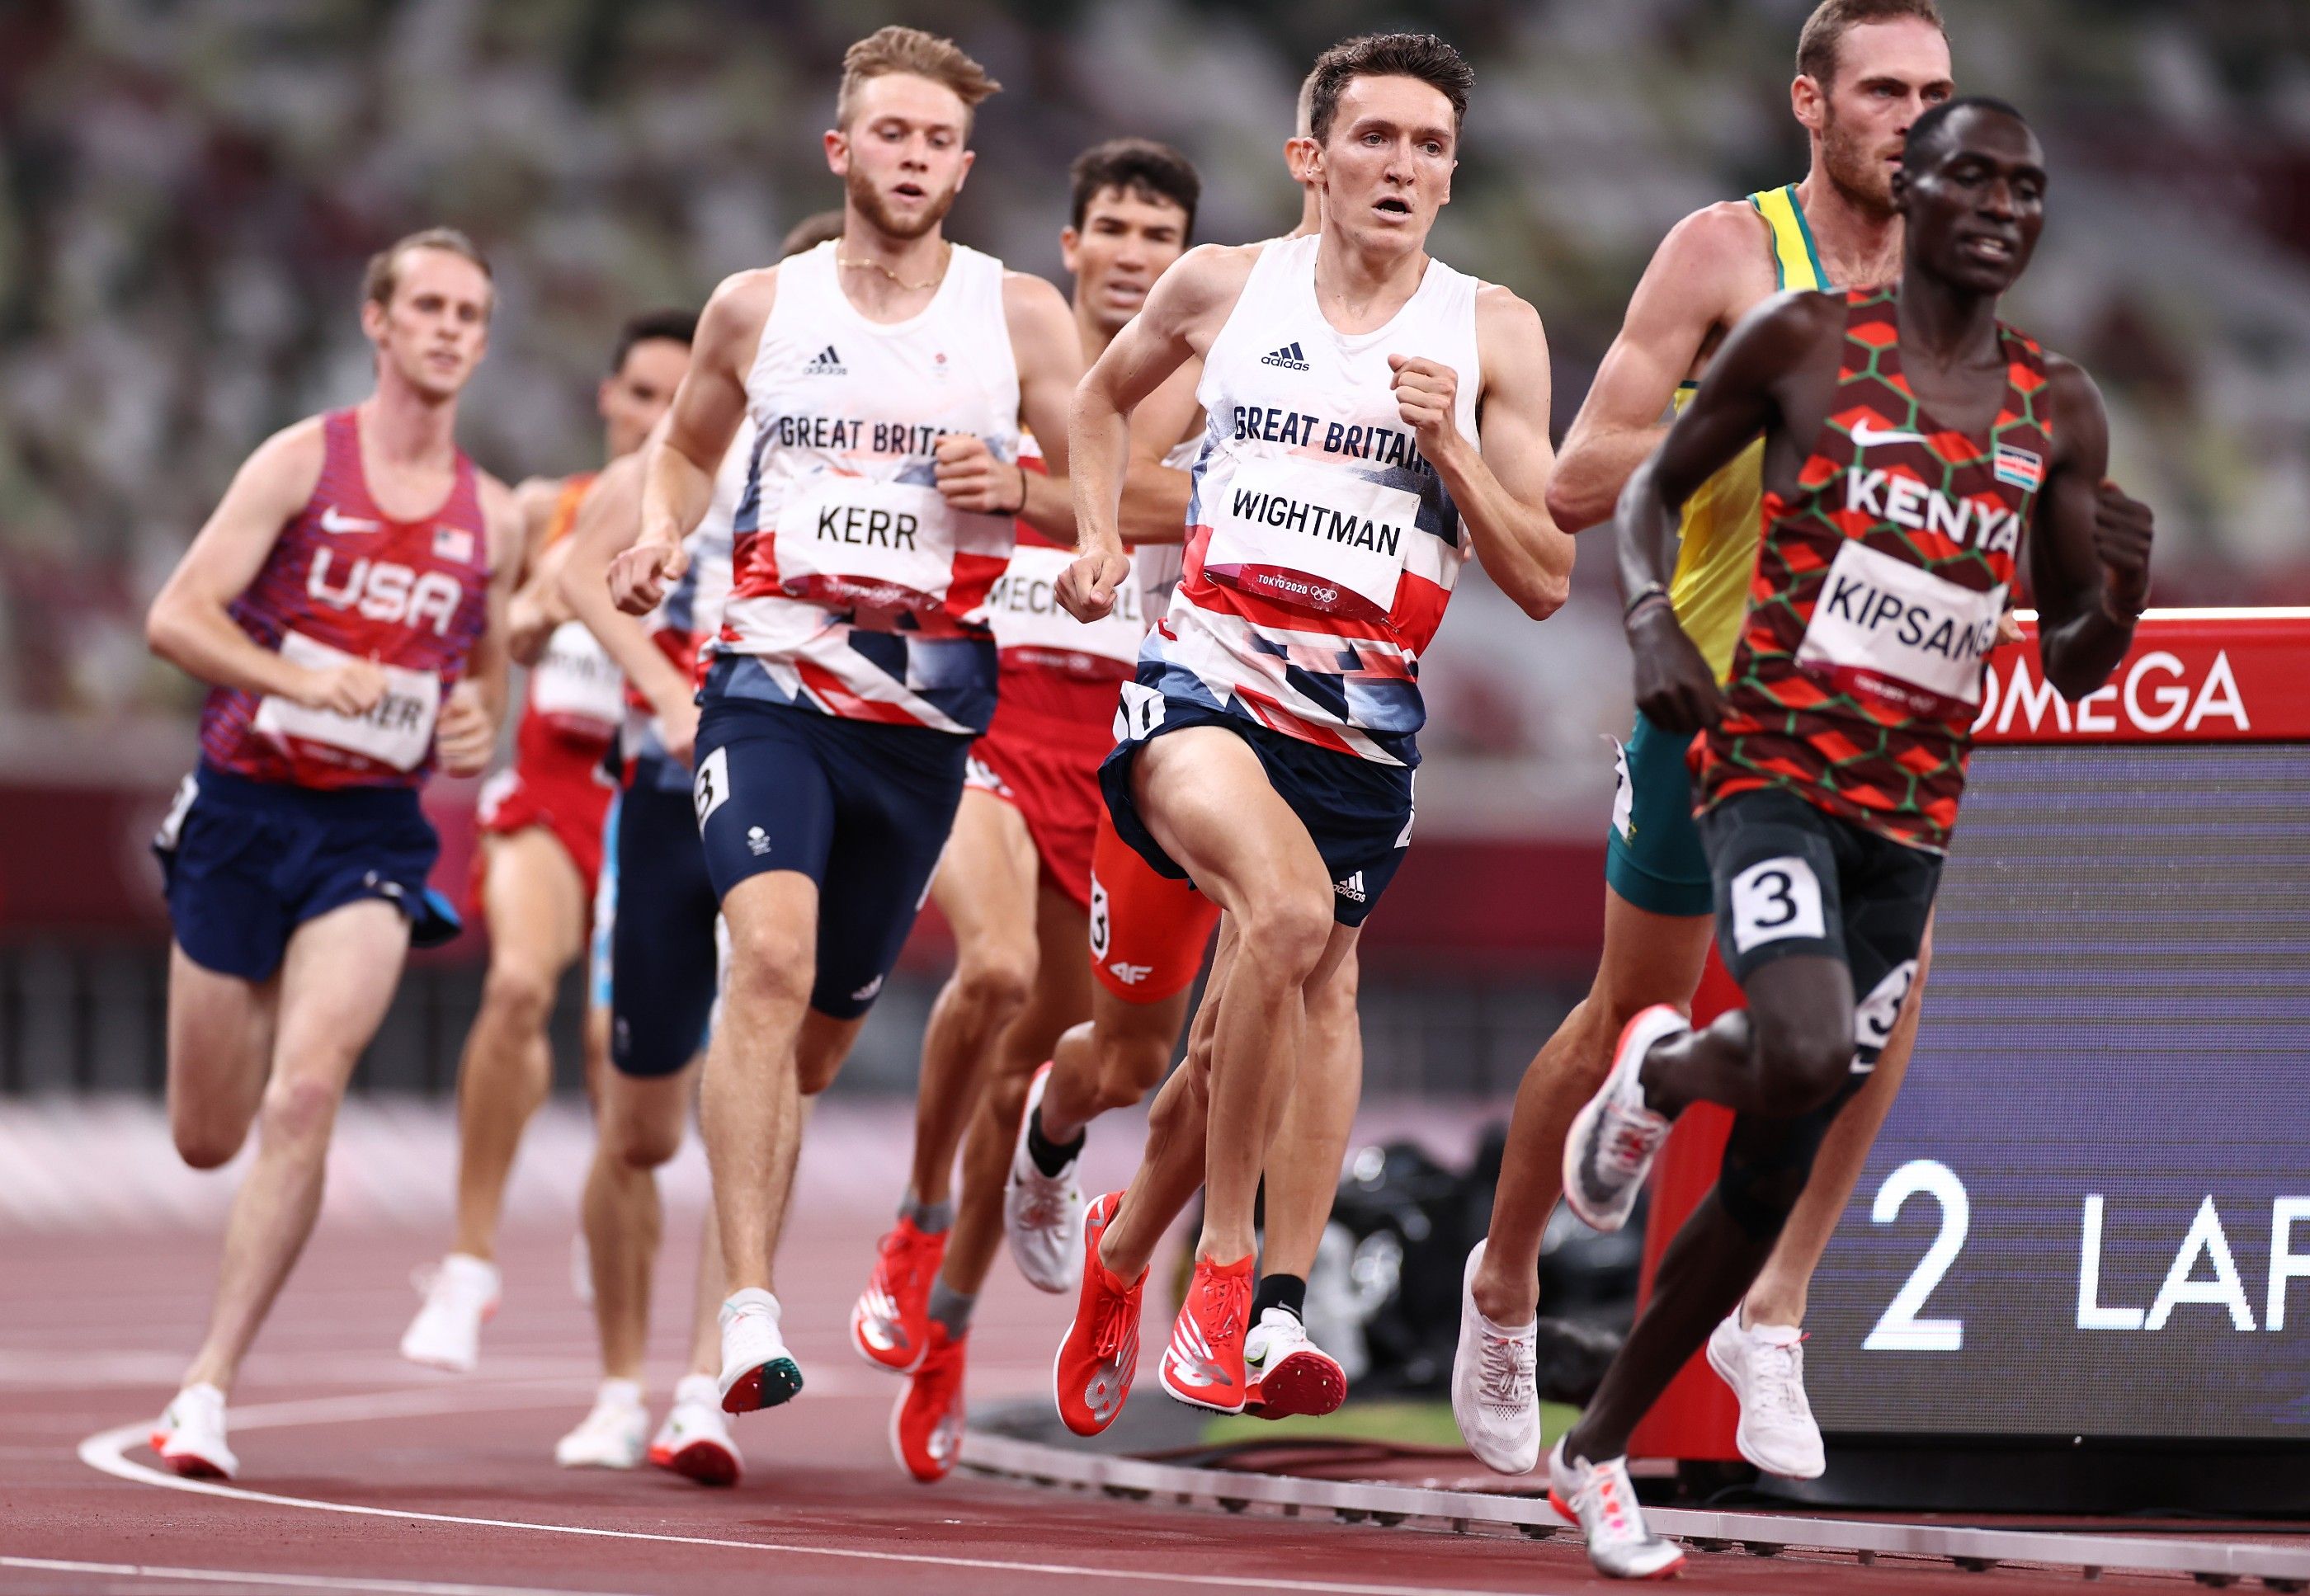 Britain's Josh Kerr and Jake Wightman in the 1500m final at the Tokyo Olympics